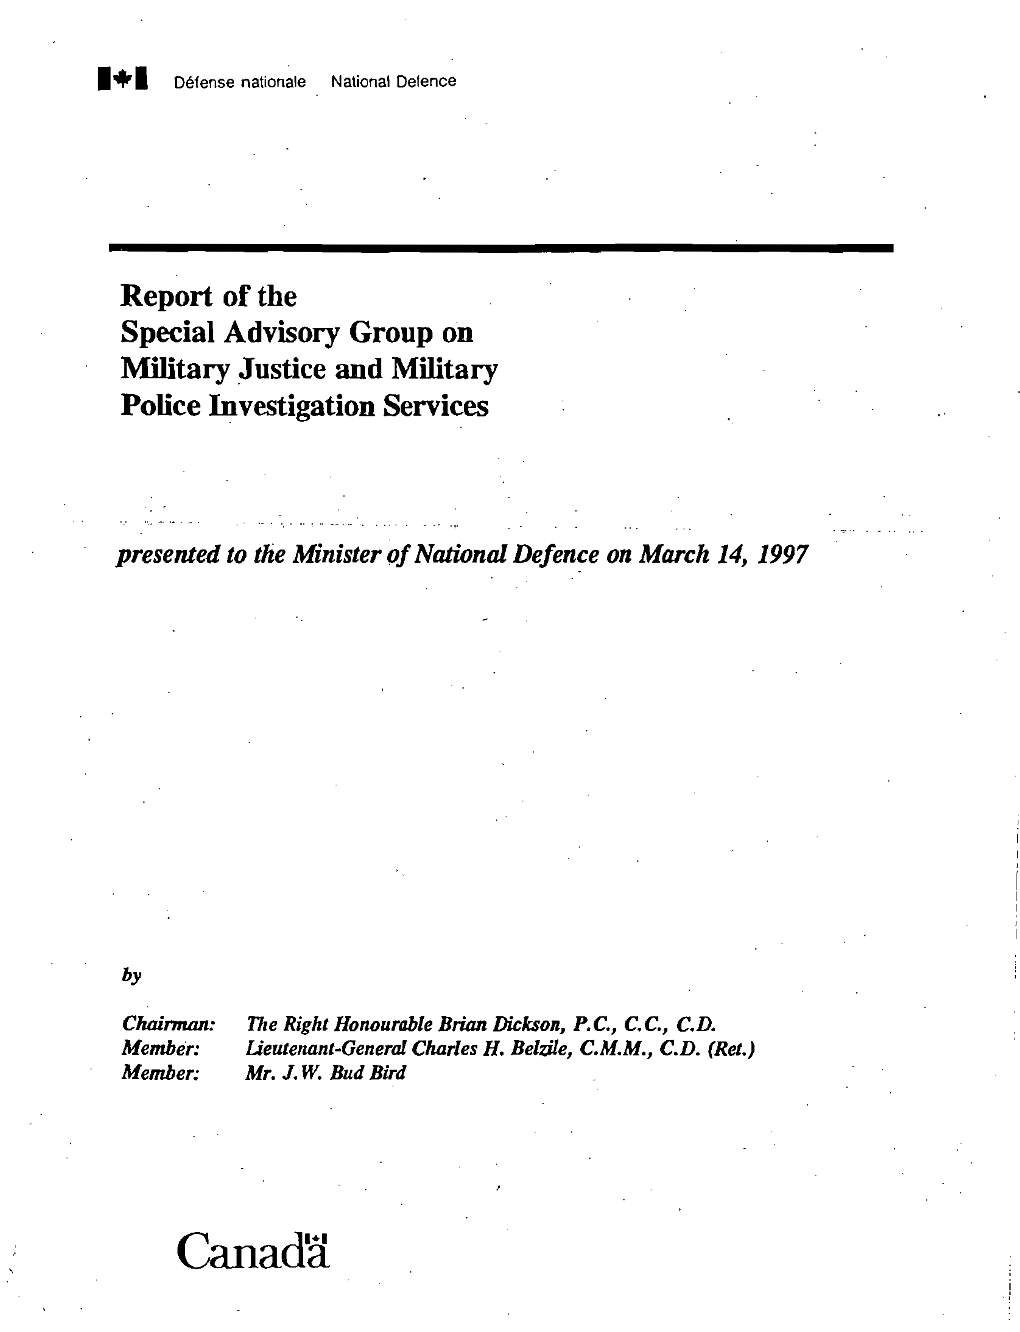 Report of the Special Advisory Group on Military Justice and Military Police Investigation Services